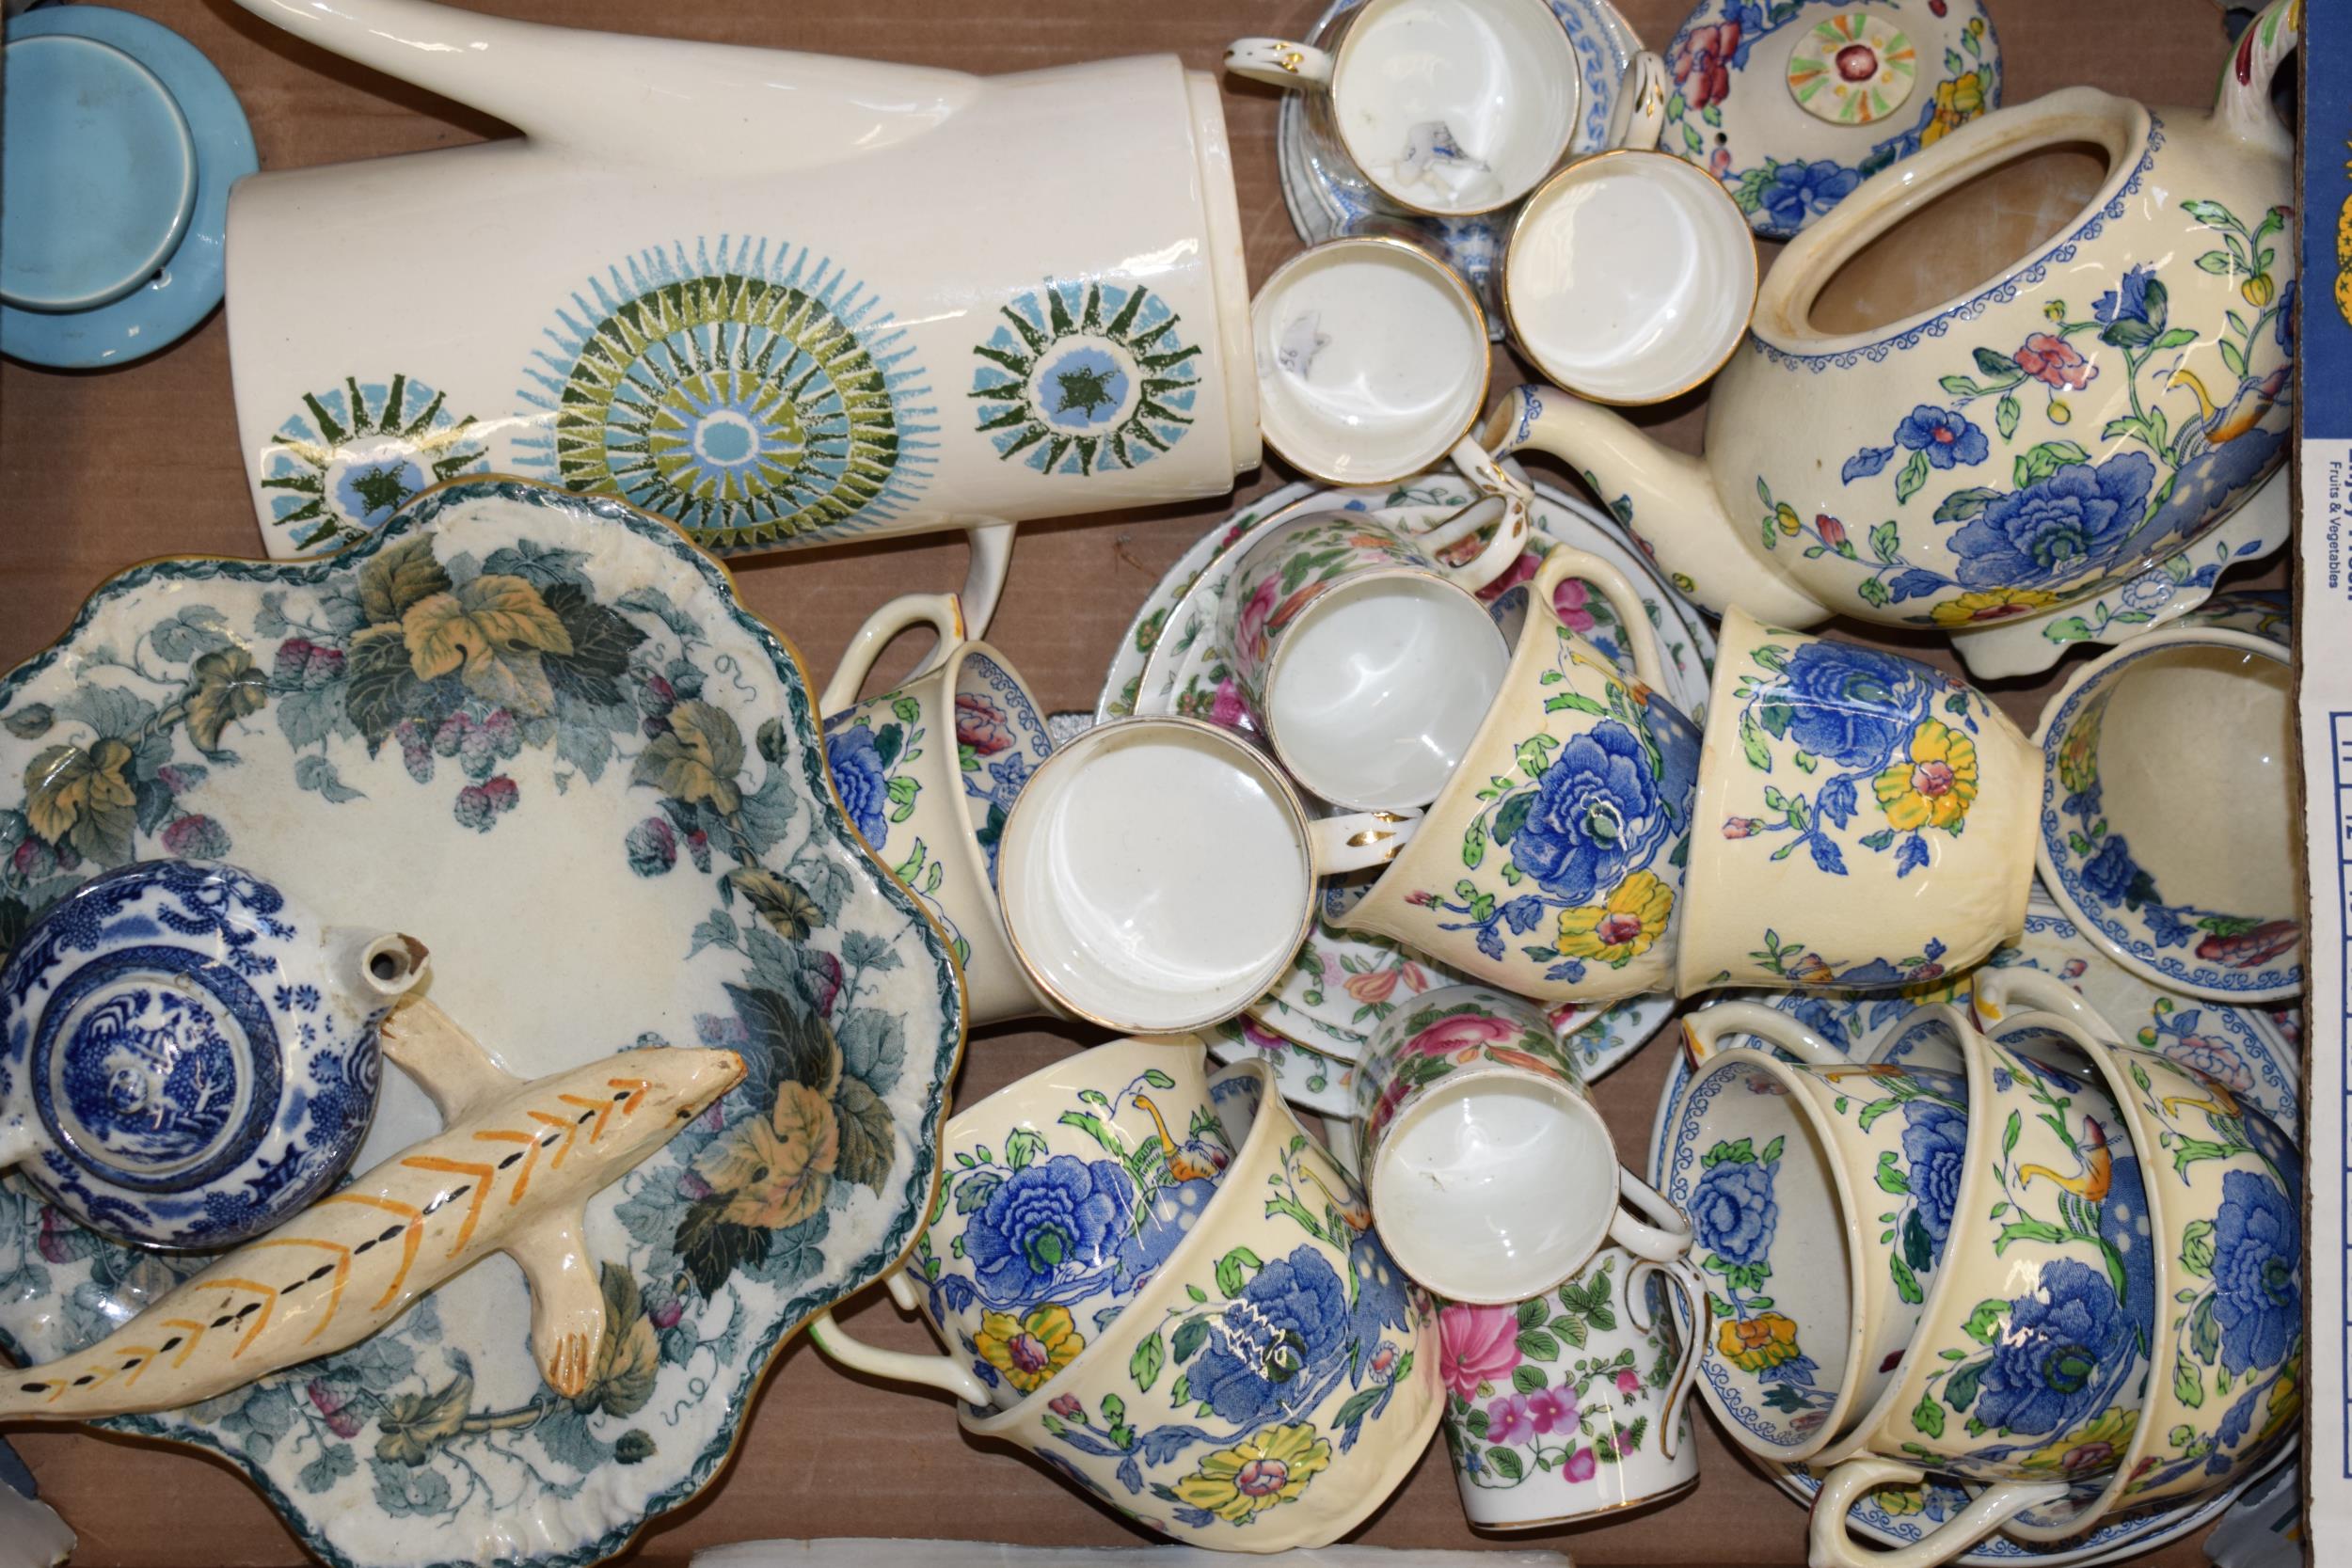 A mixed group of ceramics to include: Masons Regency, Crown Staffordshire, Davenport, and more.